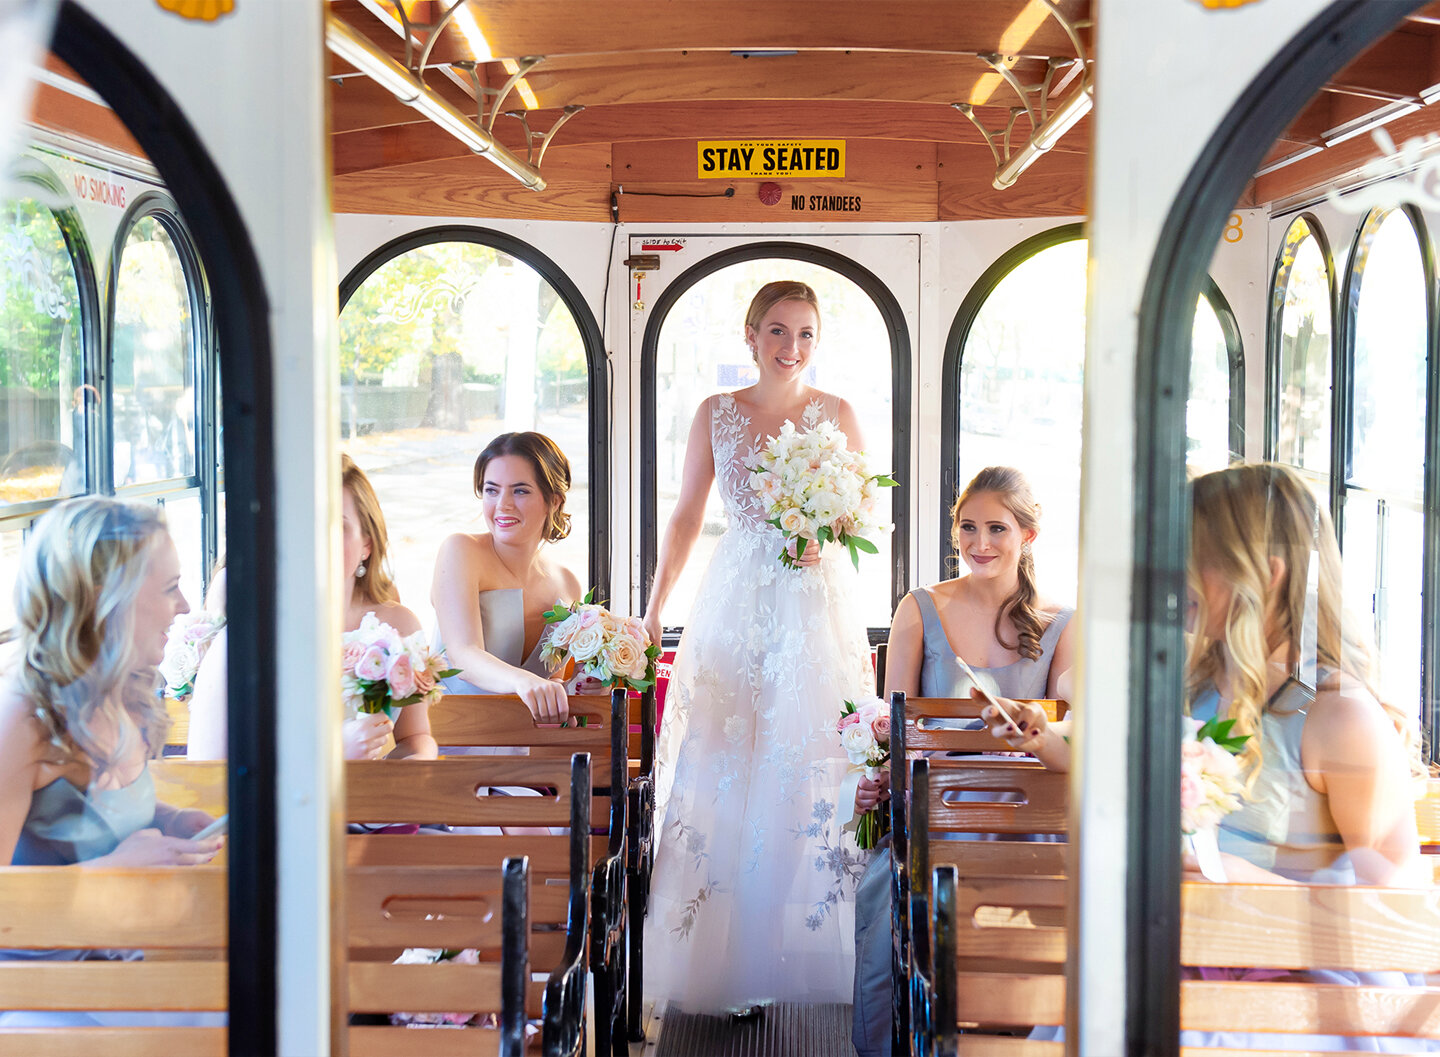 Trolley car with bride and bridesmaids